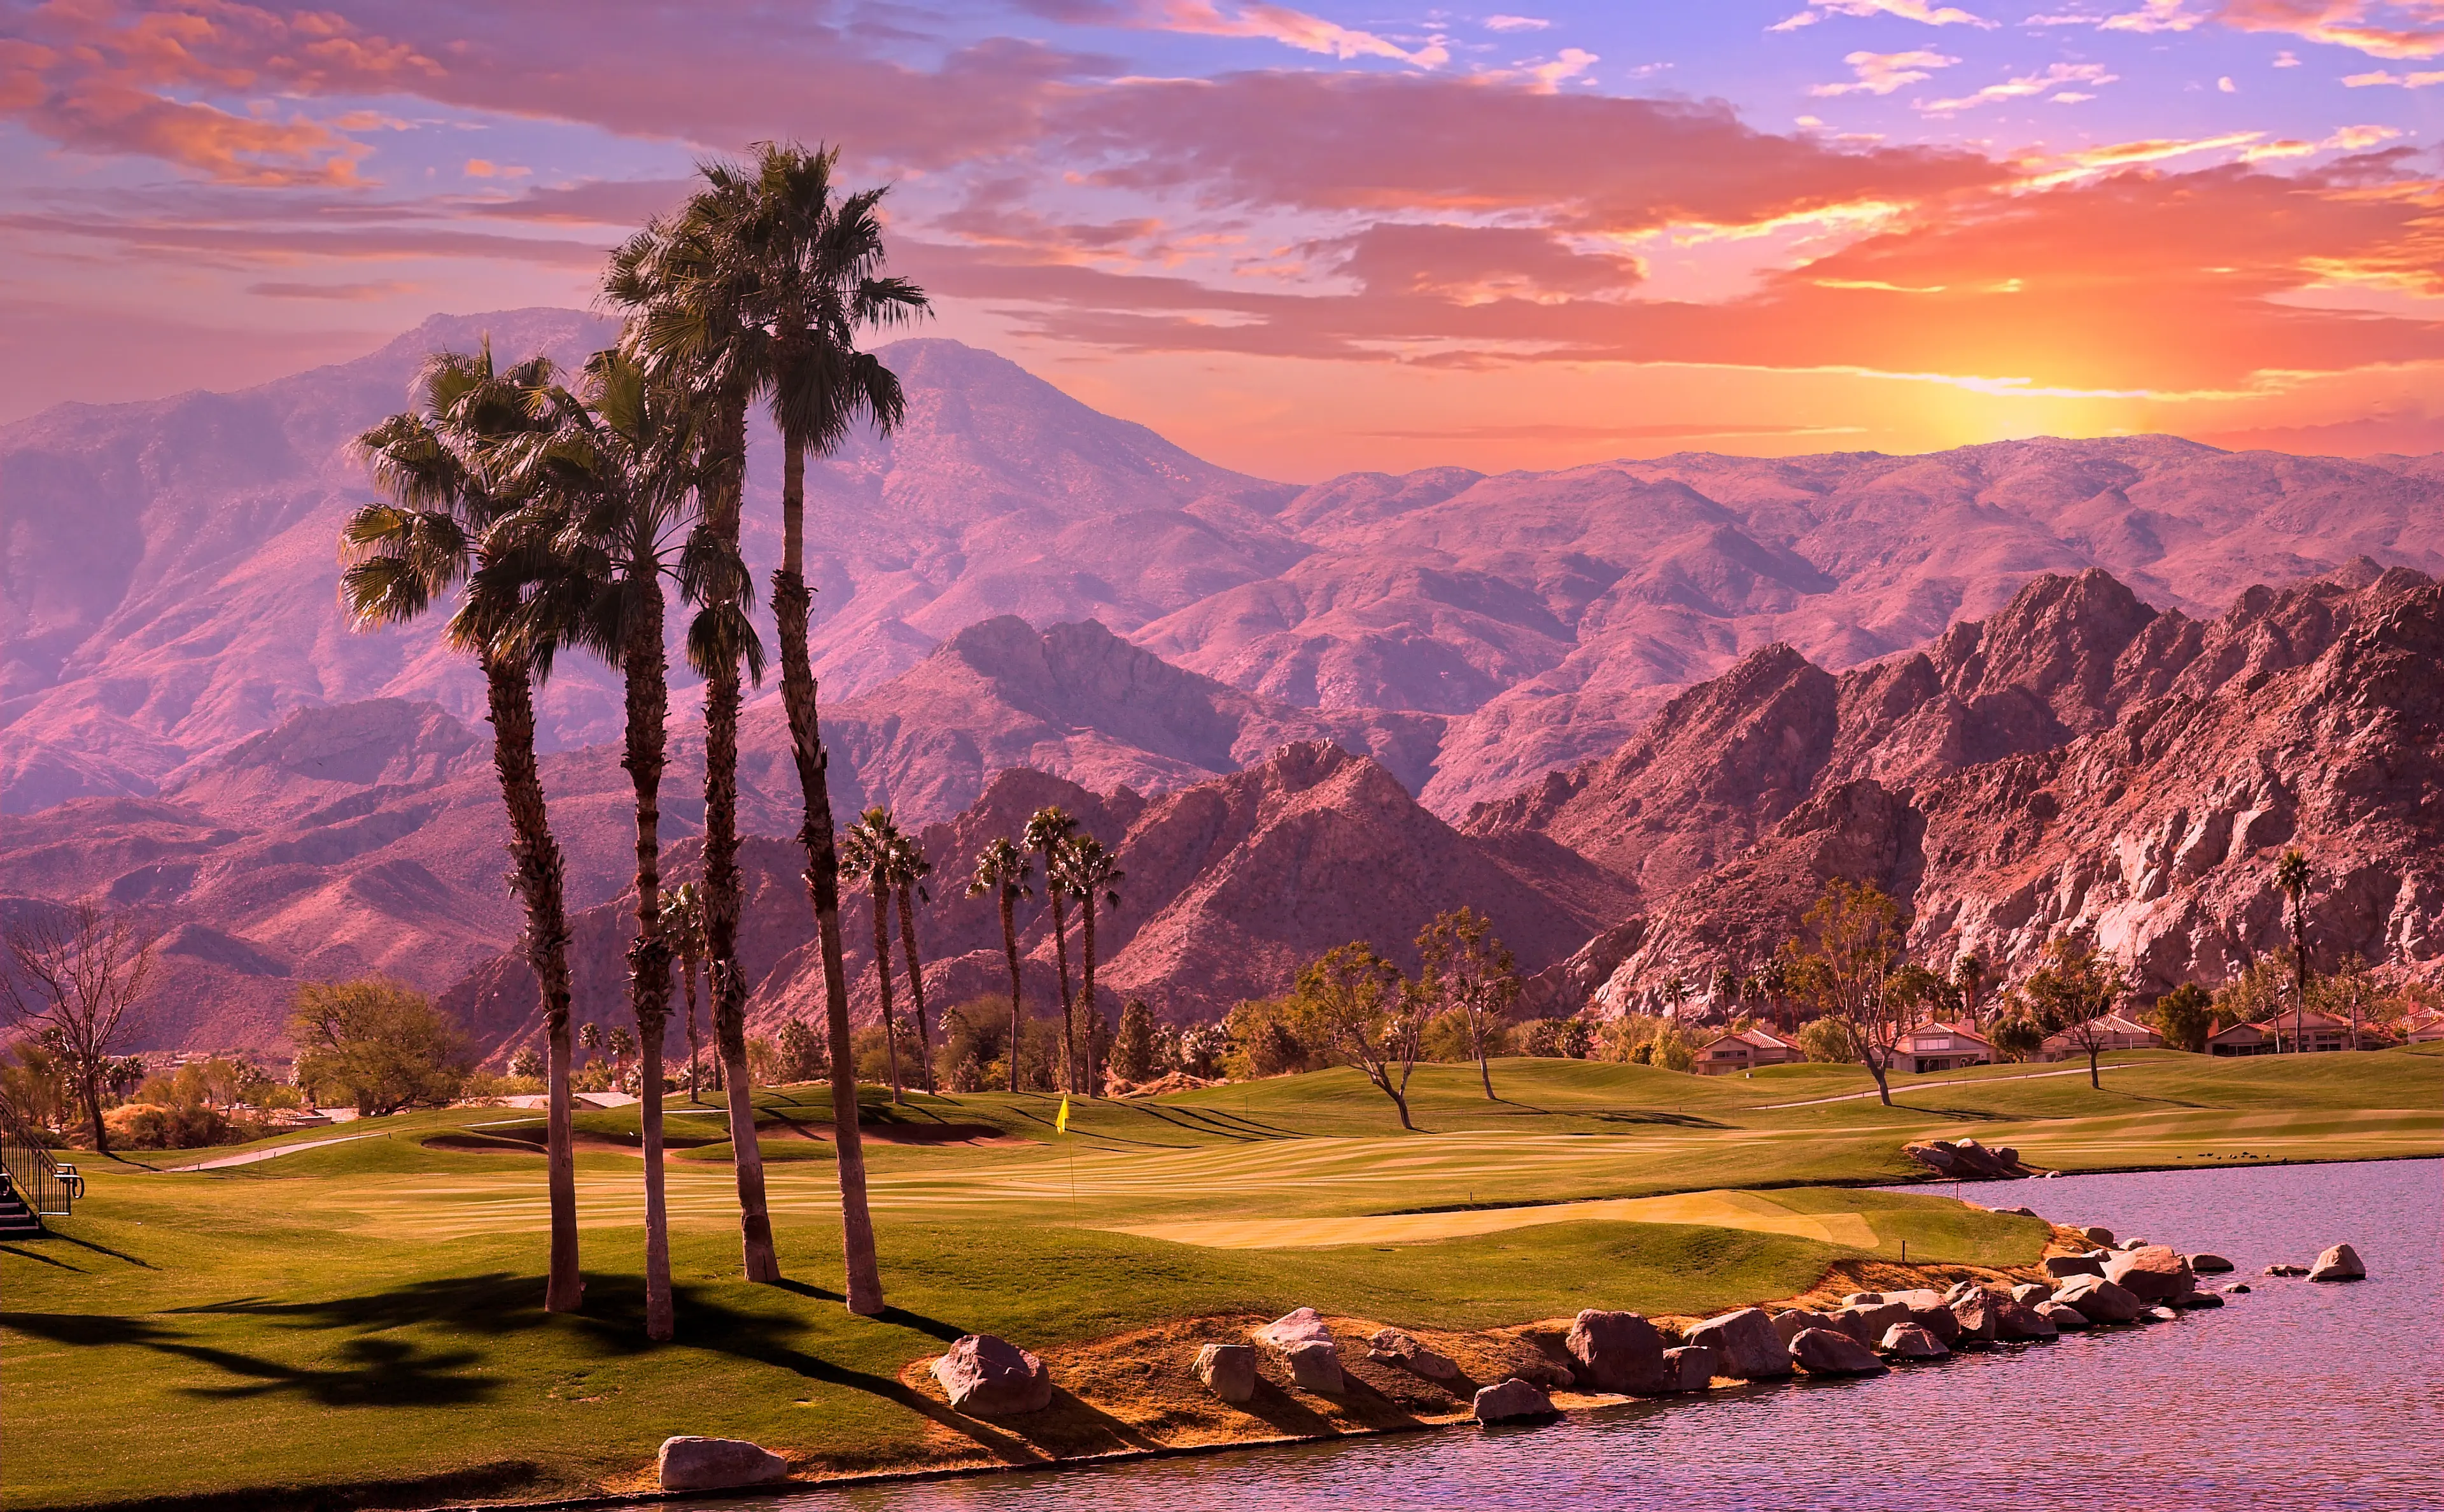 Golf course at sunset in Palm Springs